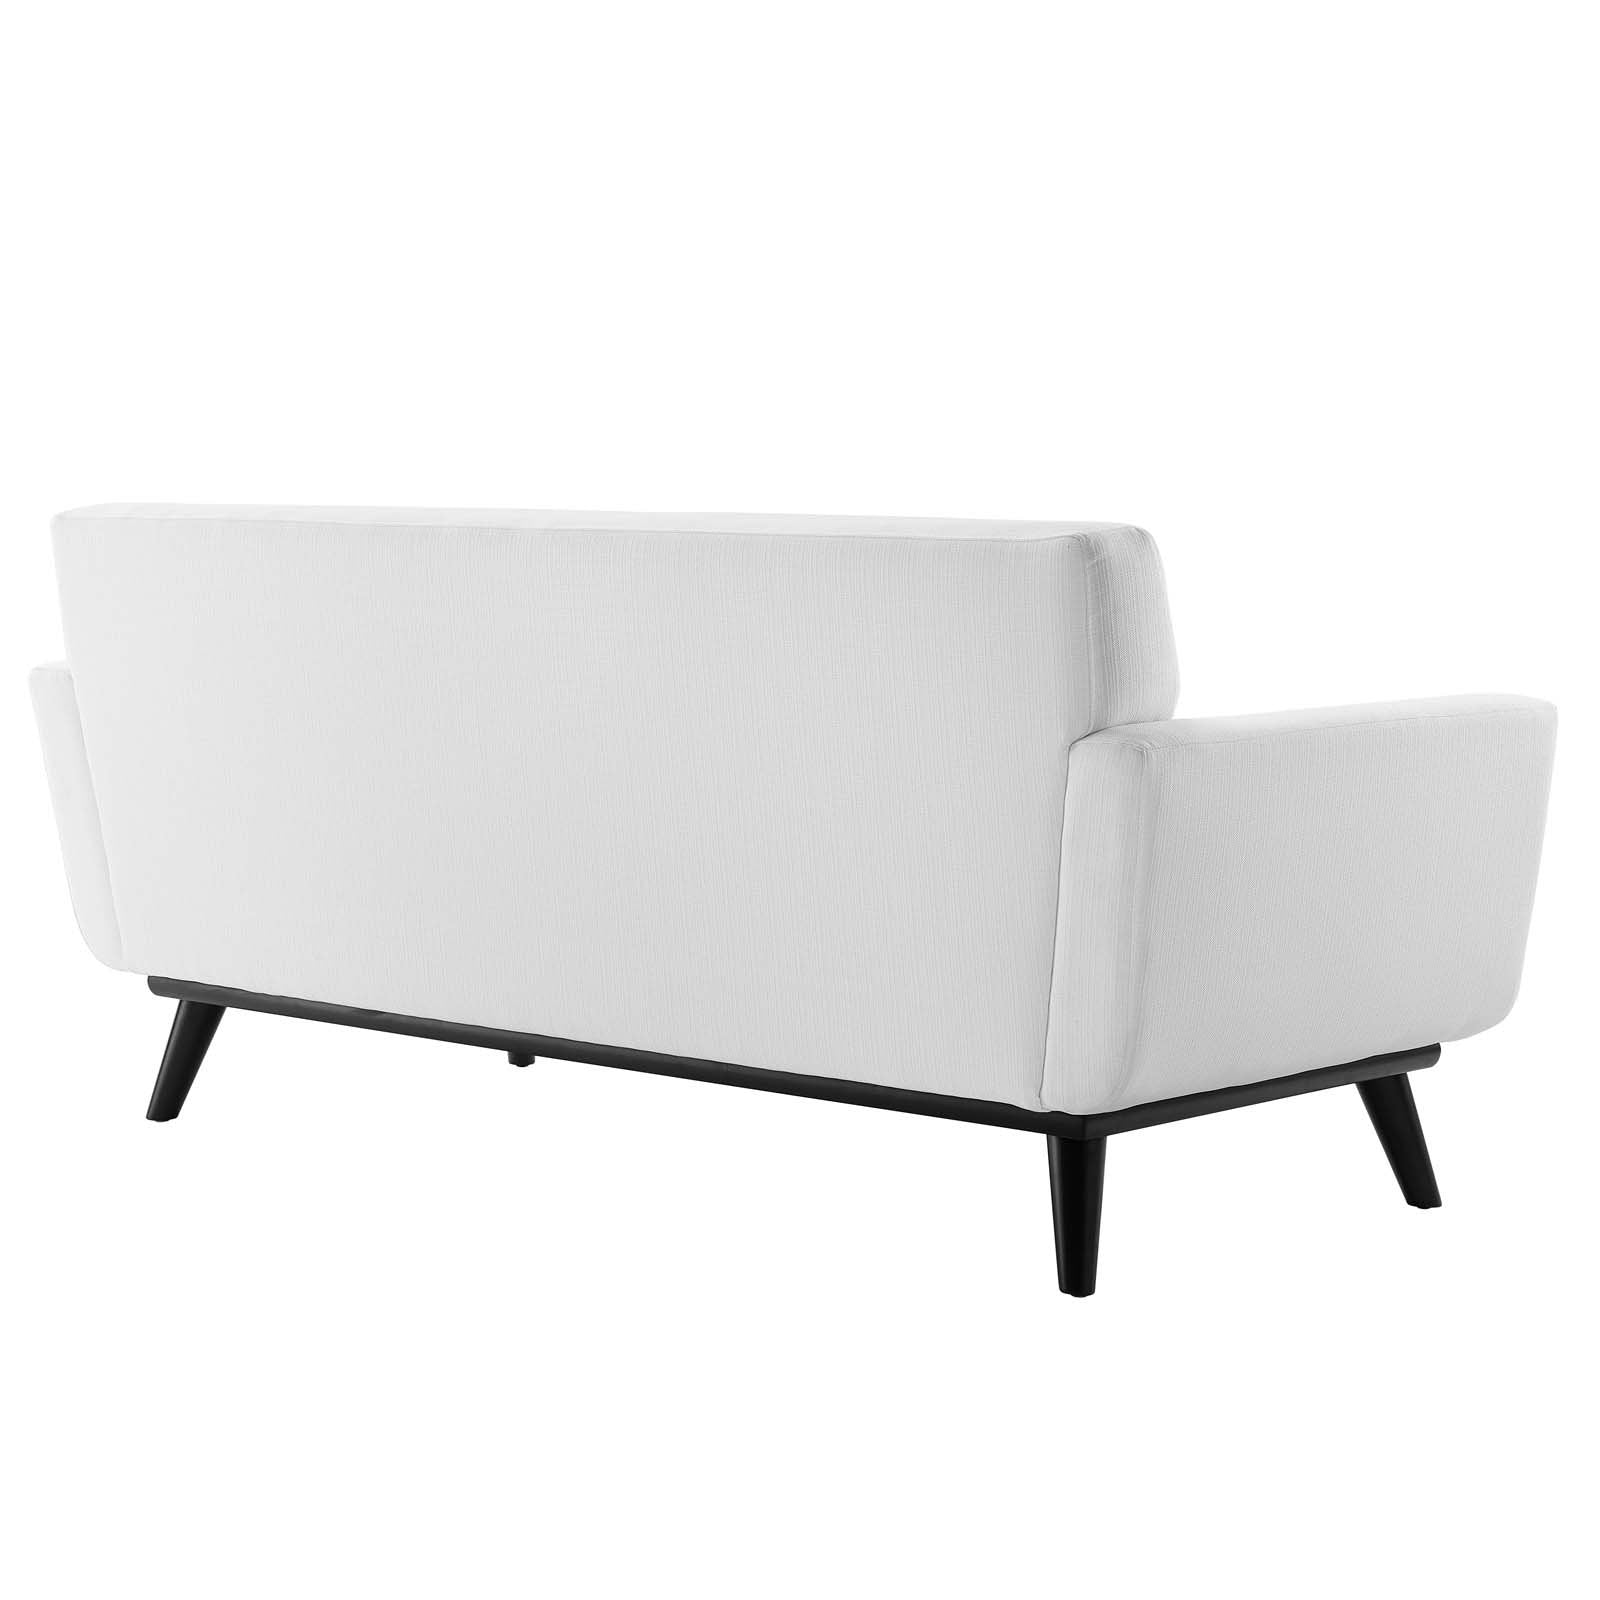 Engage Channel Tufted Fabric Loveseat - East Shore Modern Home Furnishings